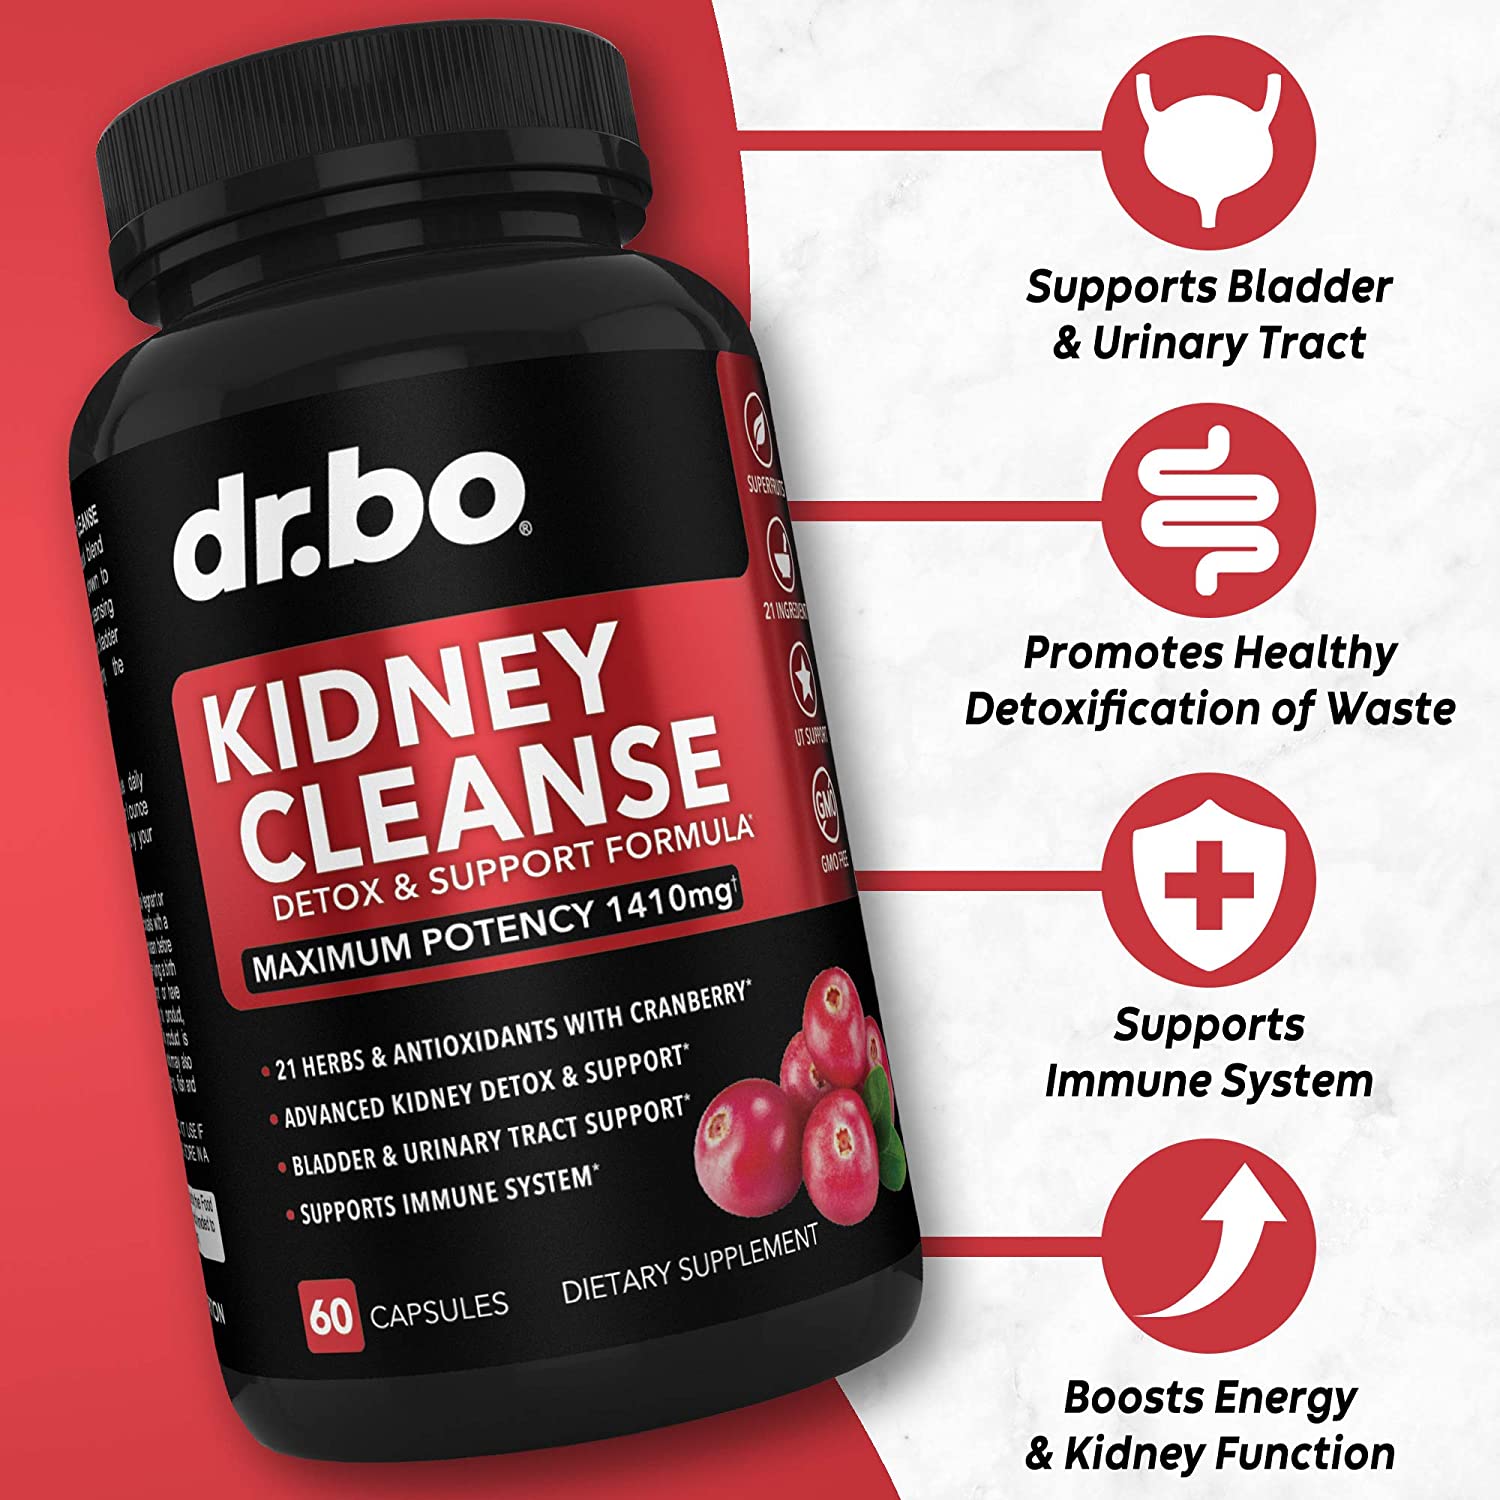 Kidney Cleanse Detox Support Supplement by DR. BO - 60 caps